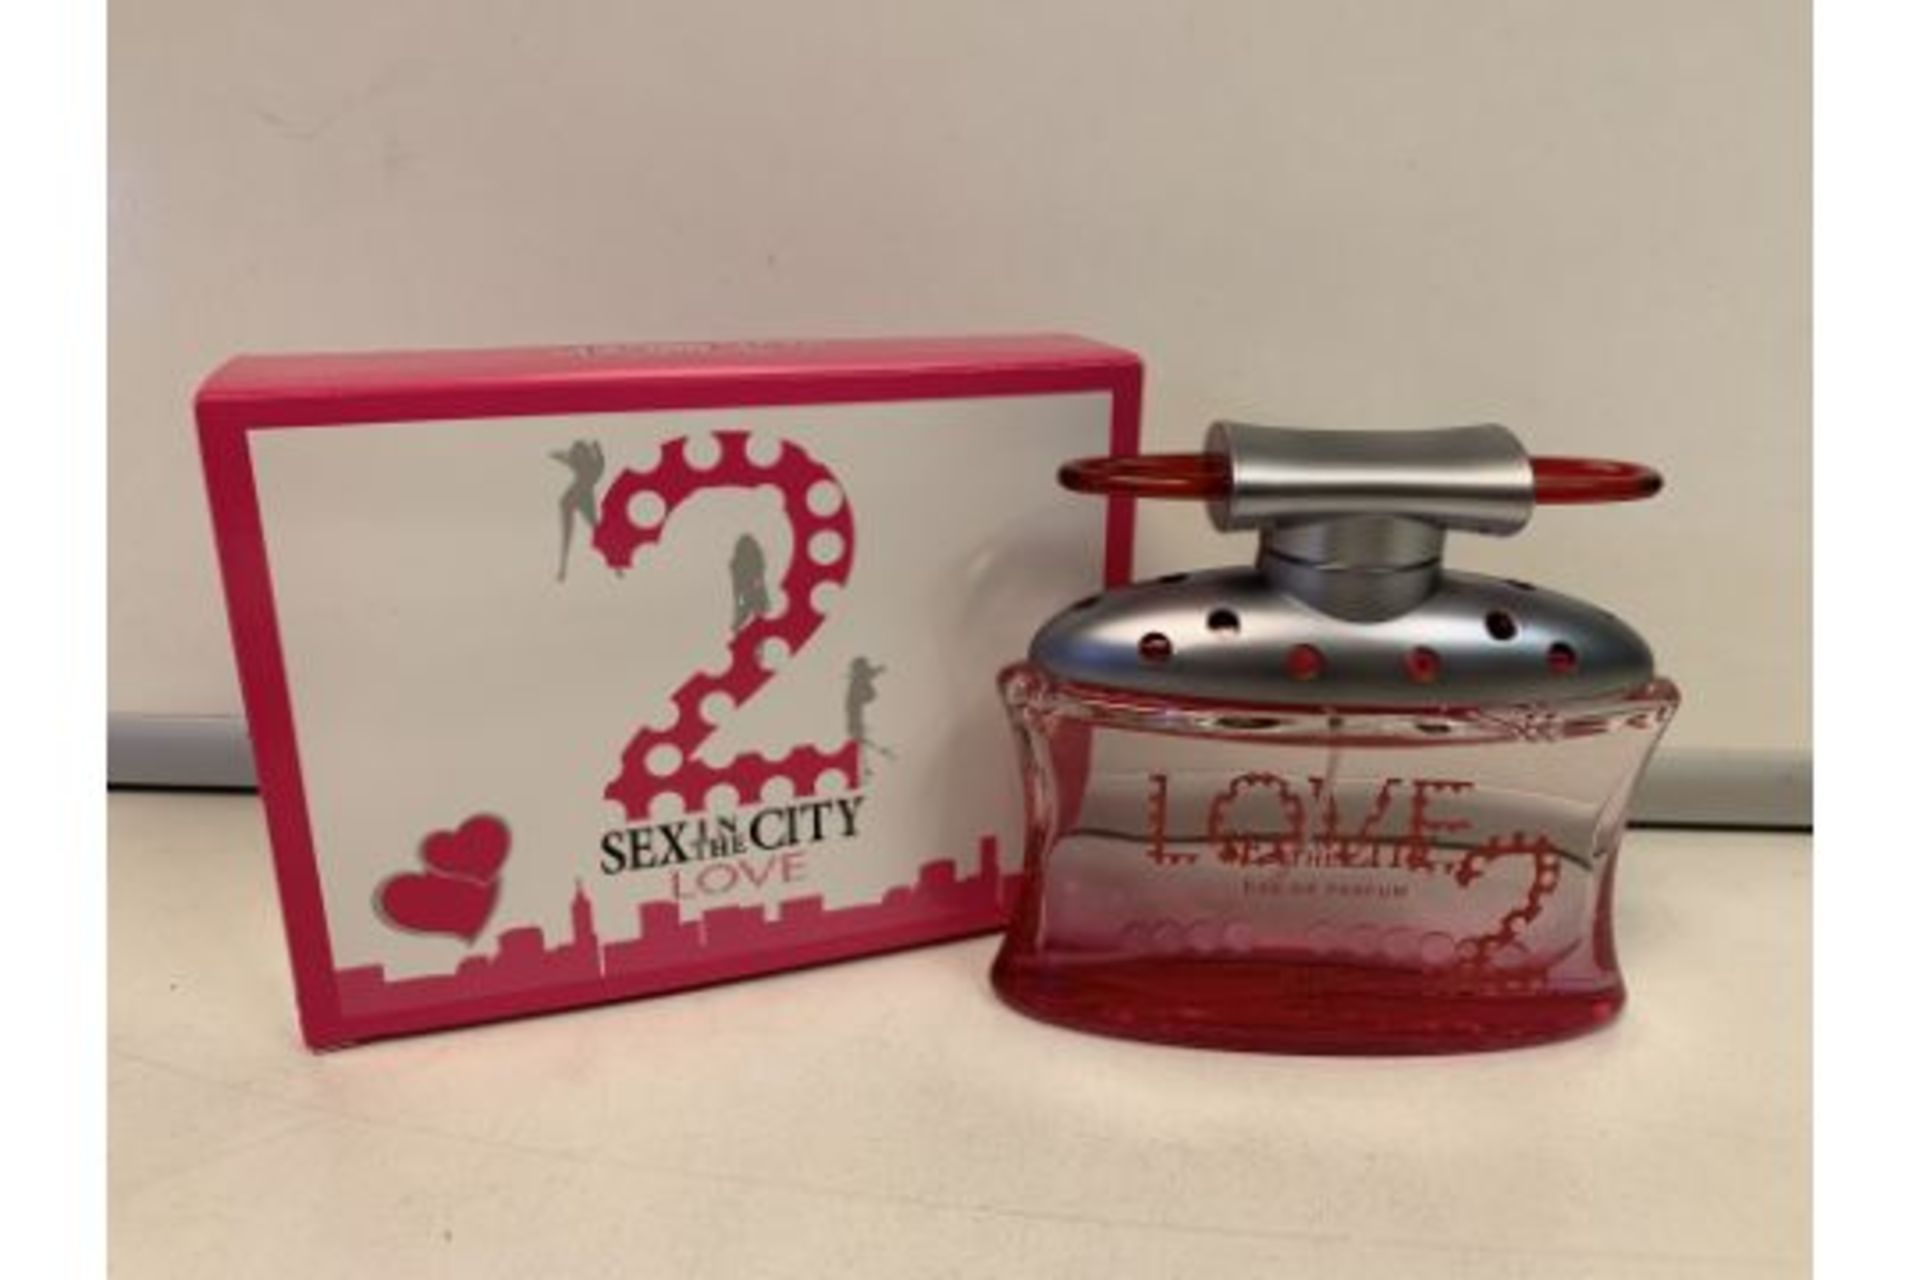 20 X BRAND NEW SEX IN THE CITY LOVE GIFT SETS INCLUDING 100ML SPRAY AND 50ML BODY LOTION